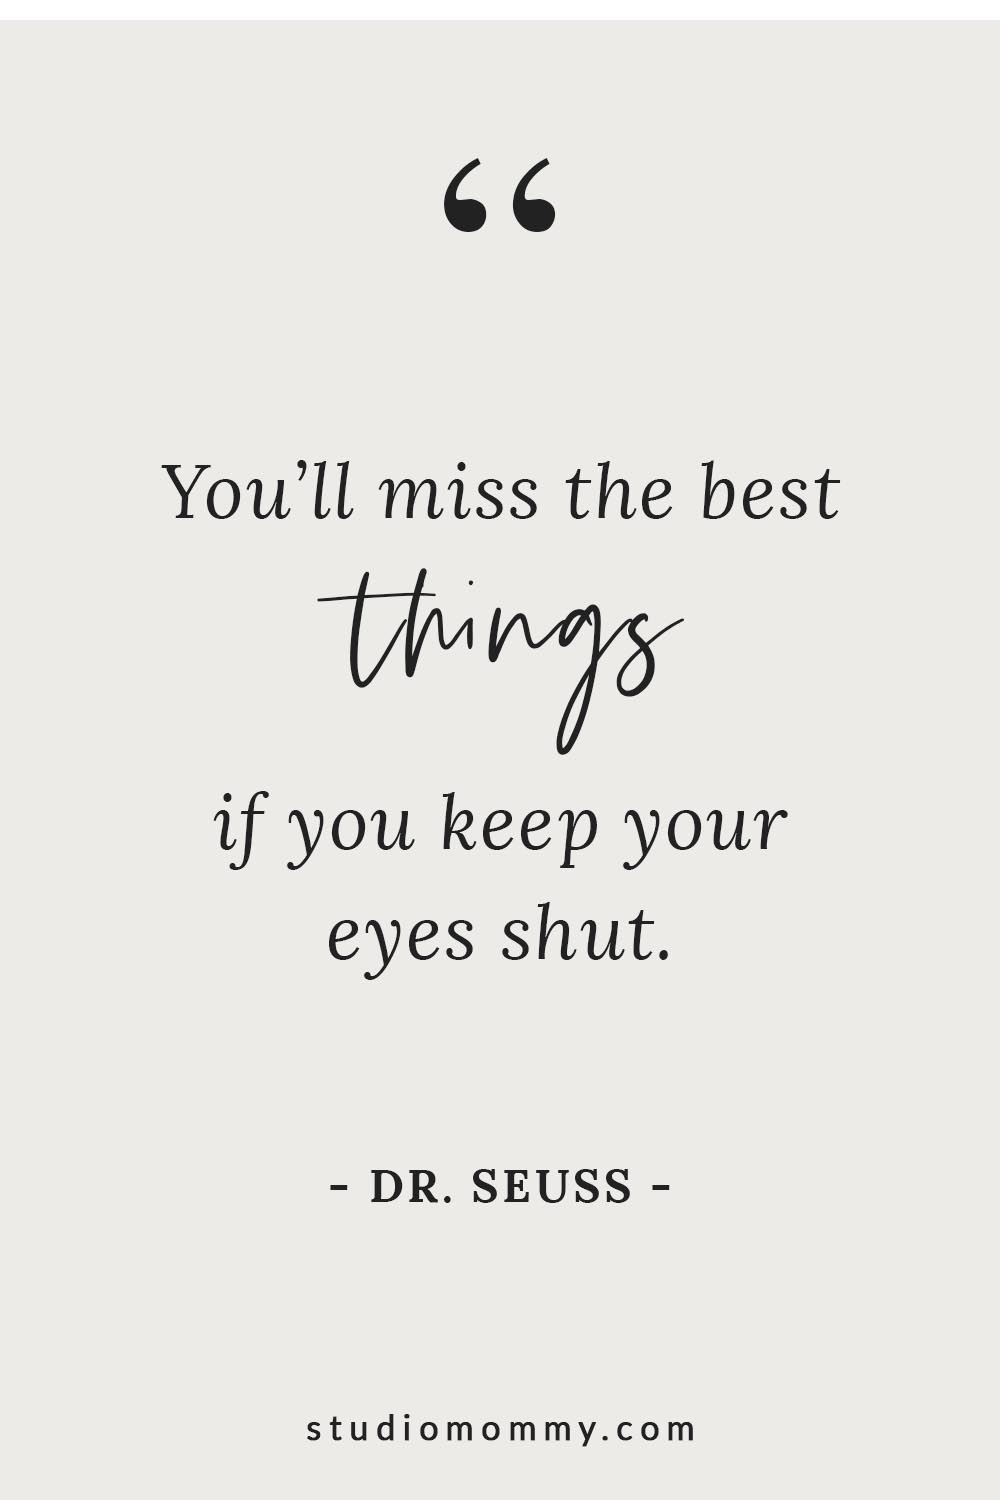 You'll miss the best things if you keep your eyes shut. - Dr. Seuss @studiomommy